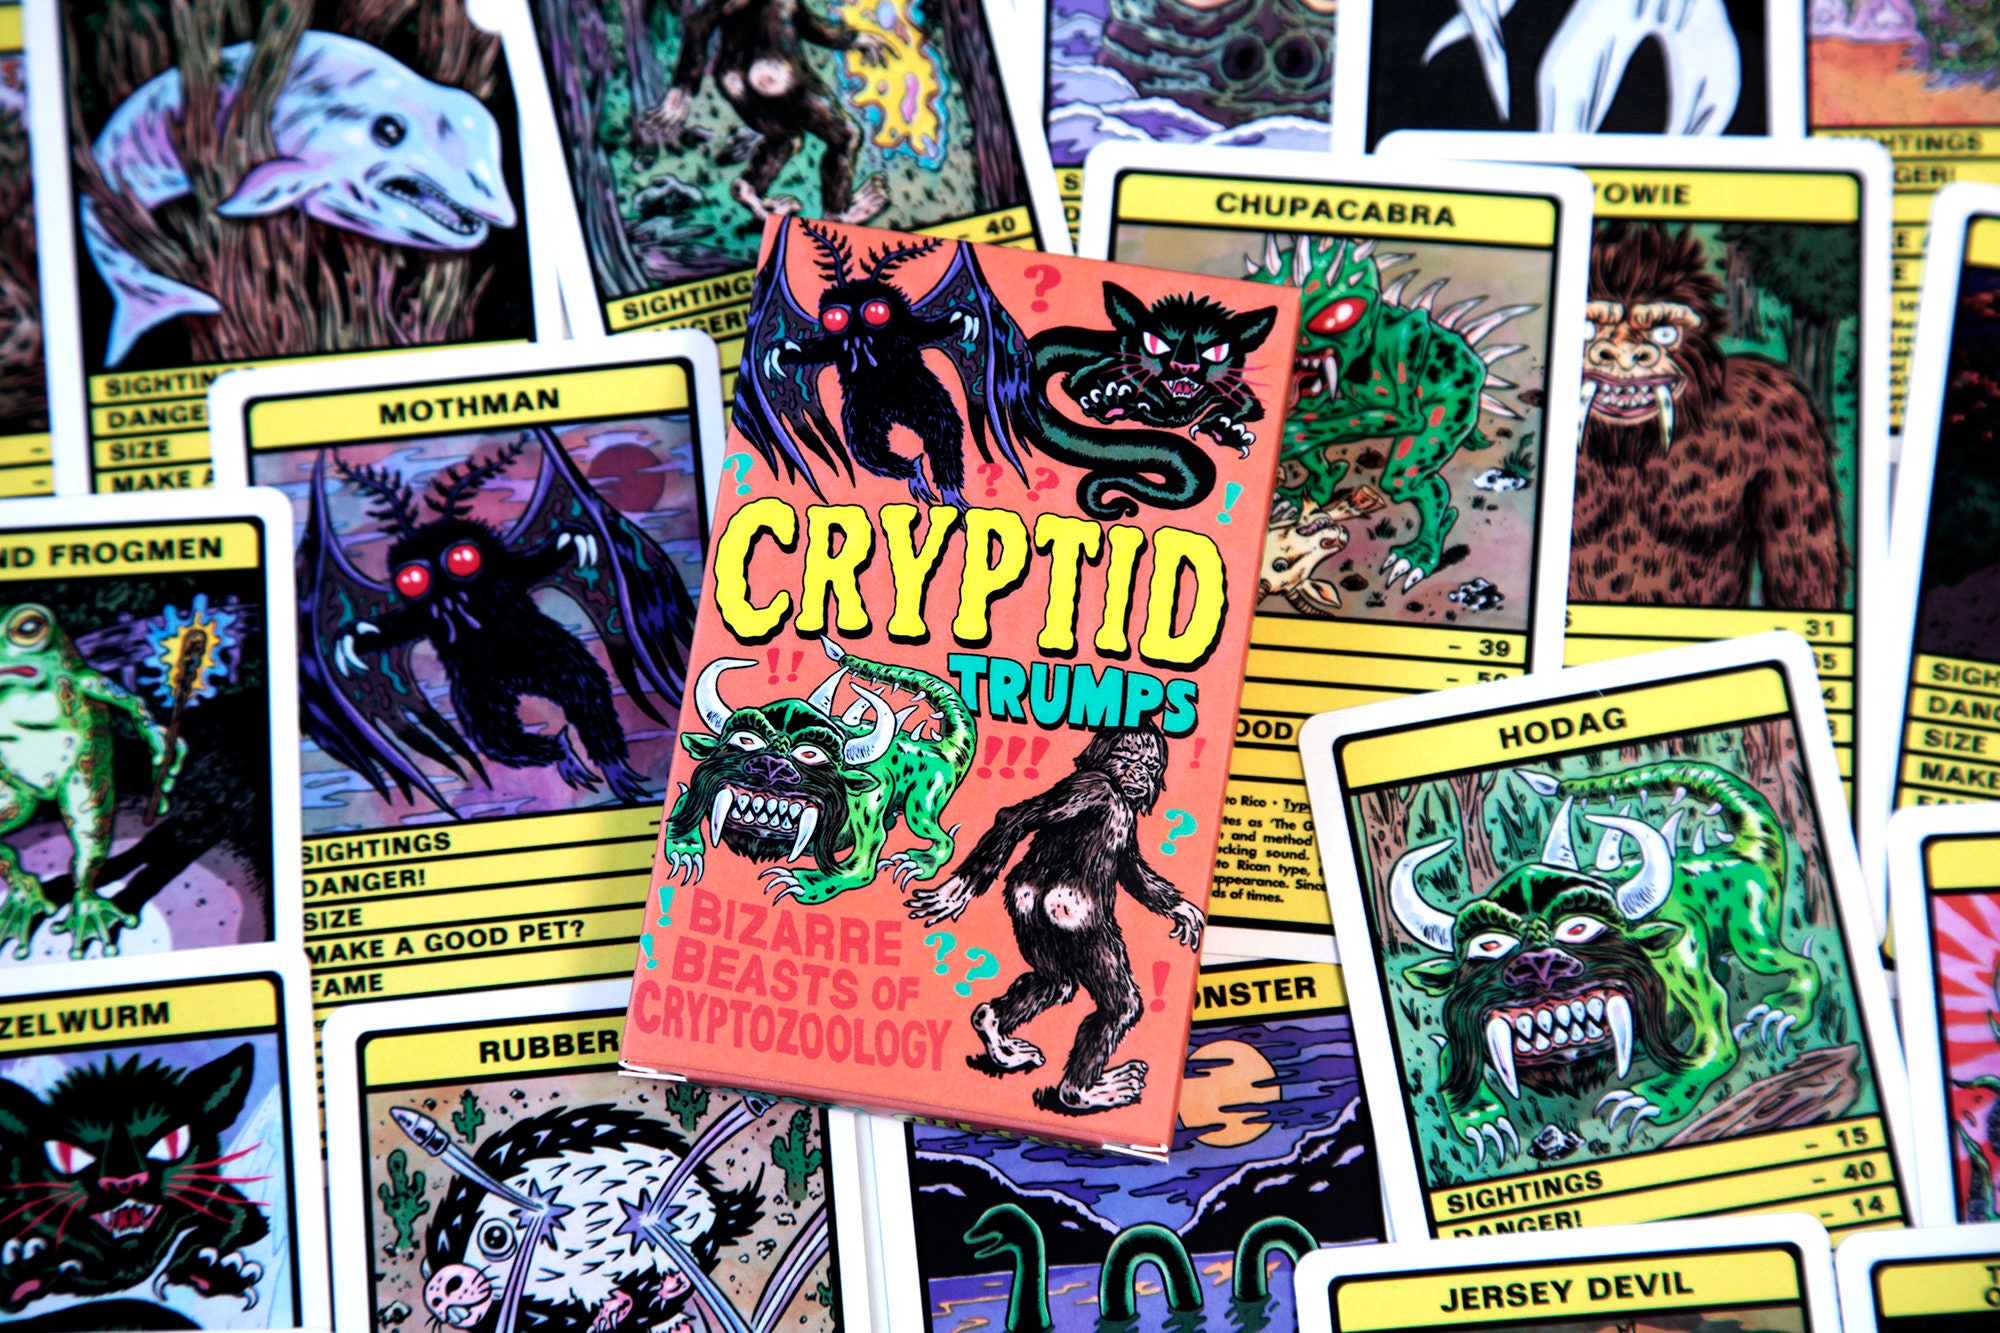 Cryptid Field Art Sketchbook & Complete Collection Volumes 1 4 Flipbook  West Virginia, Appalachia, and Legendary Creatures 